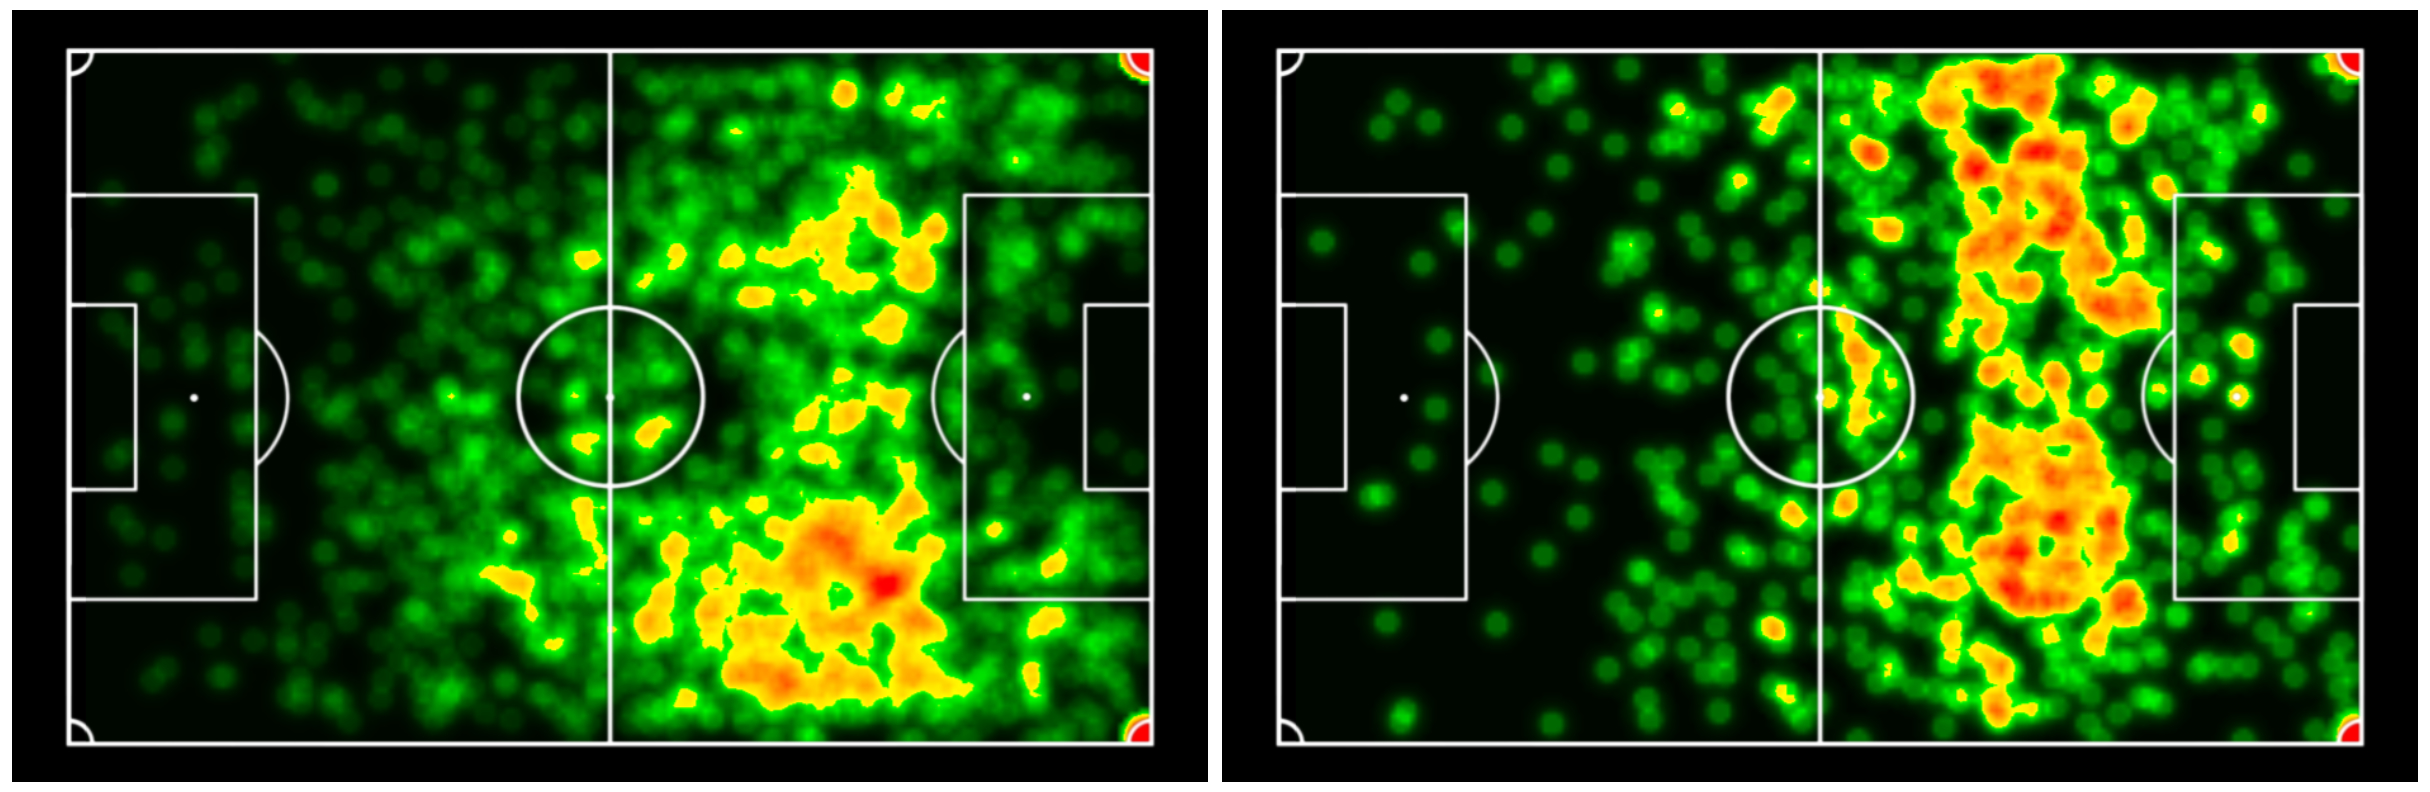 Kevin De Bruyne touch maps for 2019-20 (left) and 2020-21 (right)